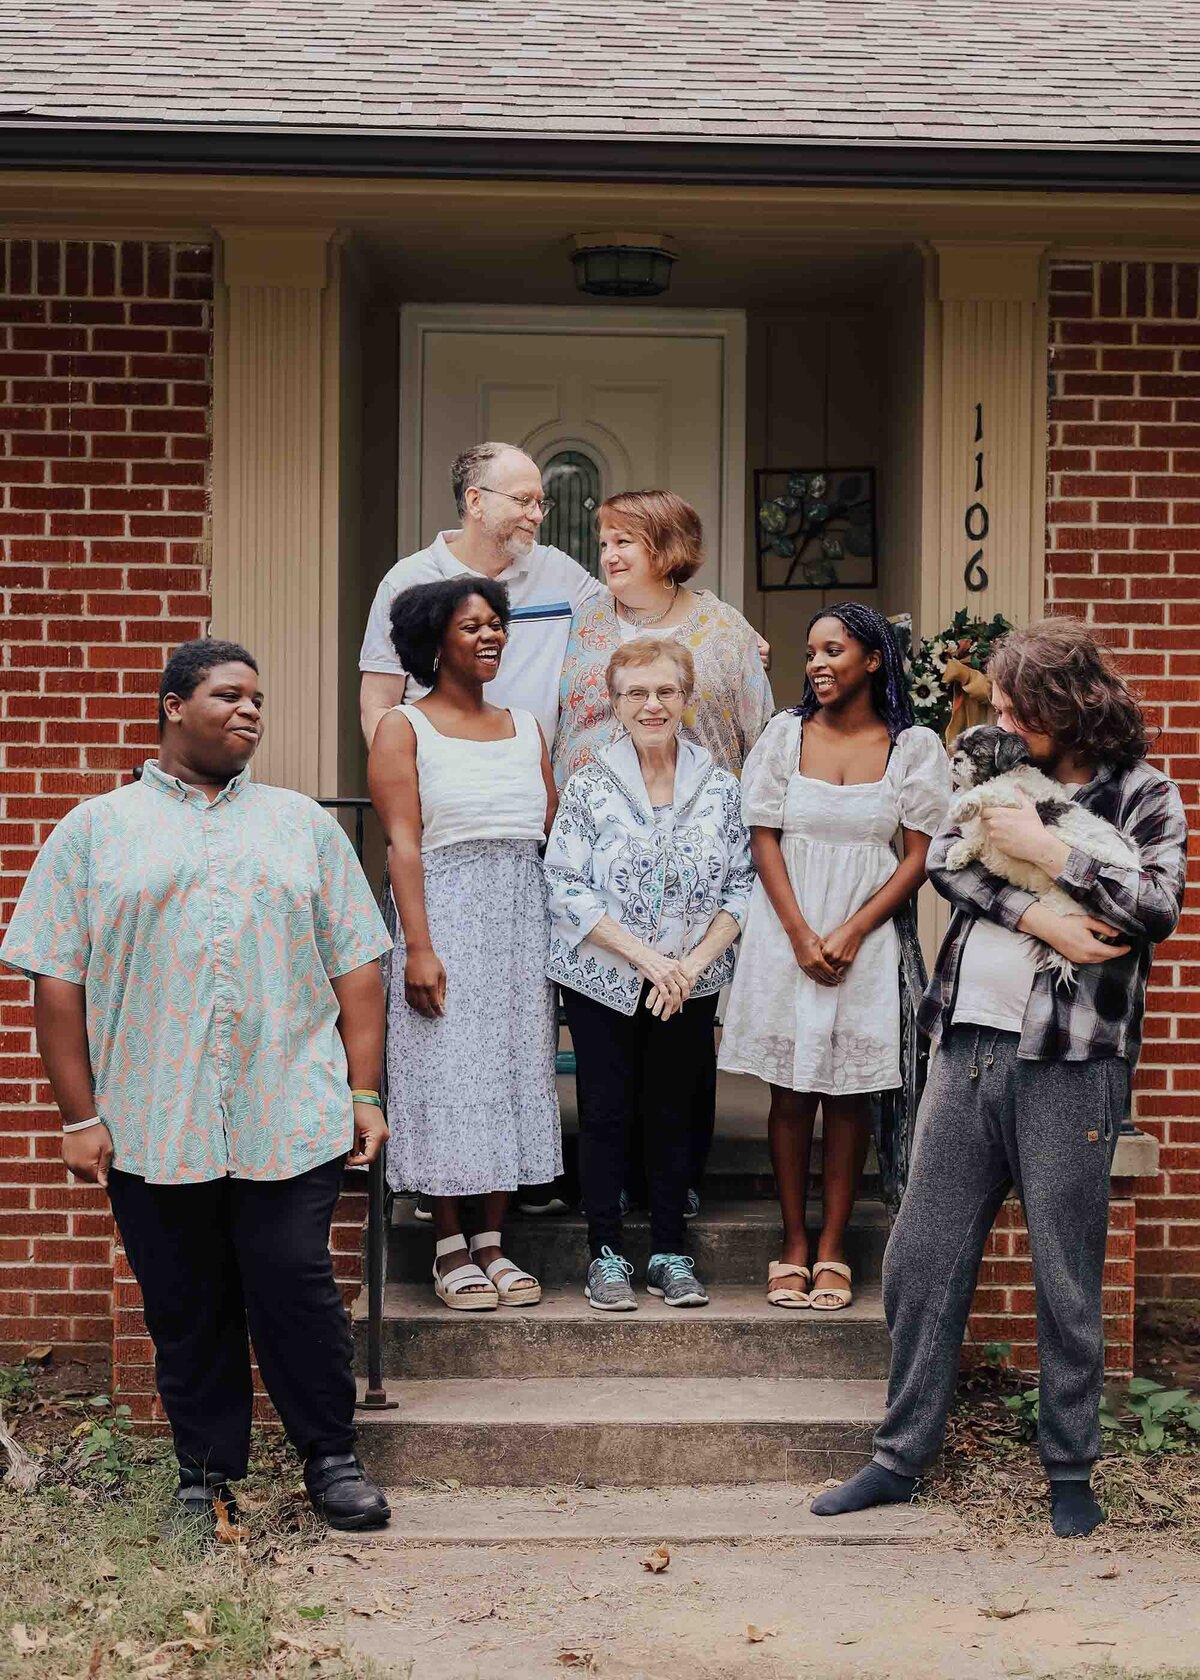 Maddie Rae Photography family photo, grandma, mom and dad, and four kids standing on the front steps all looking at each other smiling